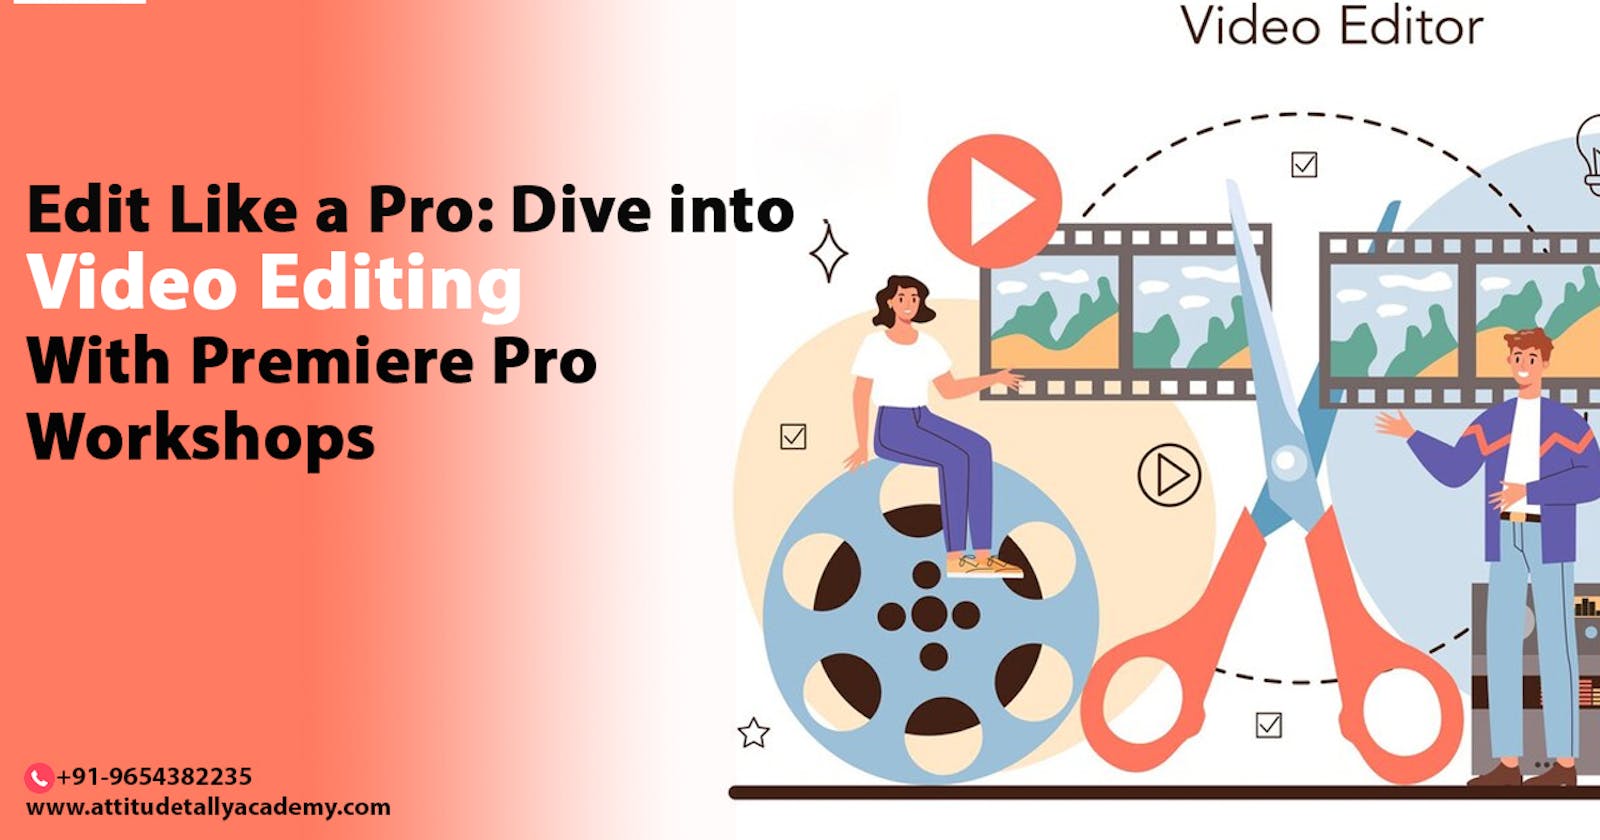 Edit Like a Pro: Dive into Video Editing with Premiere Pro Workshops